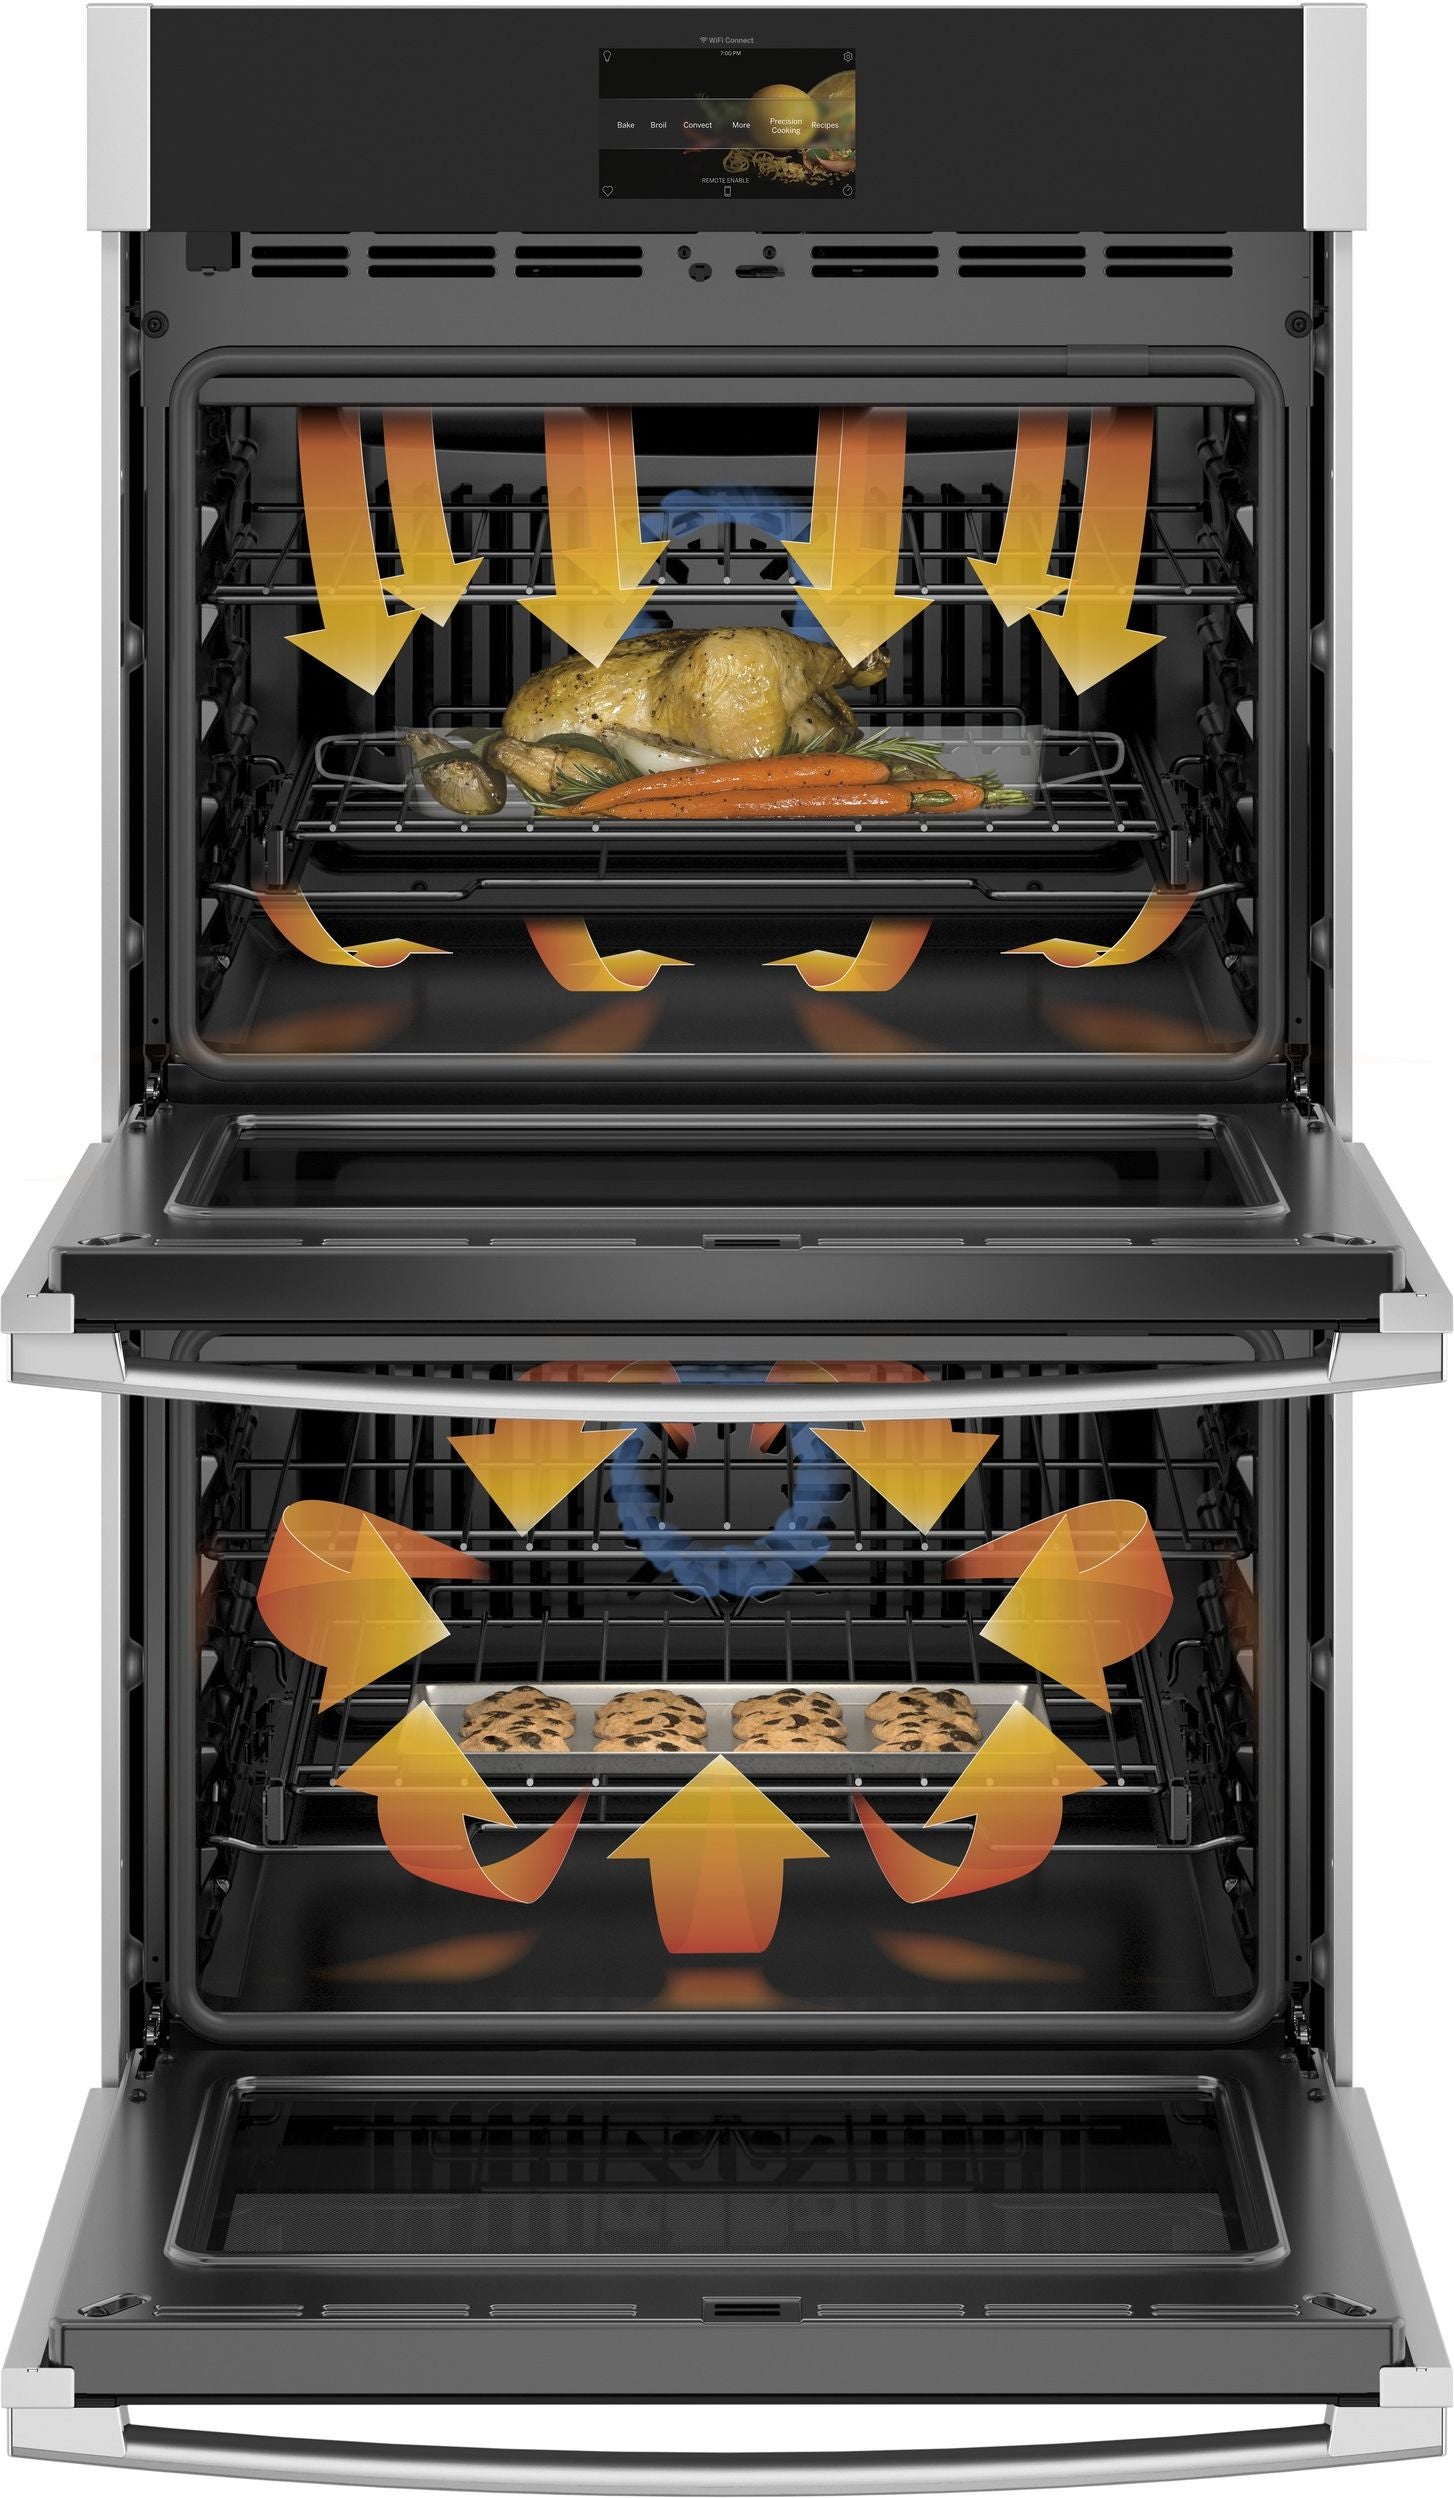 Double Oven Convection